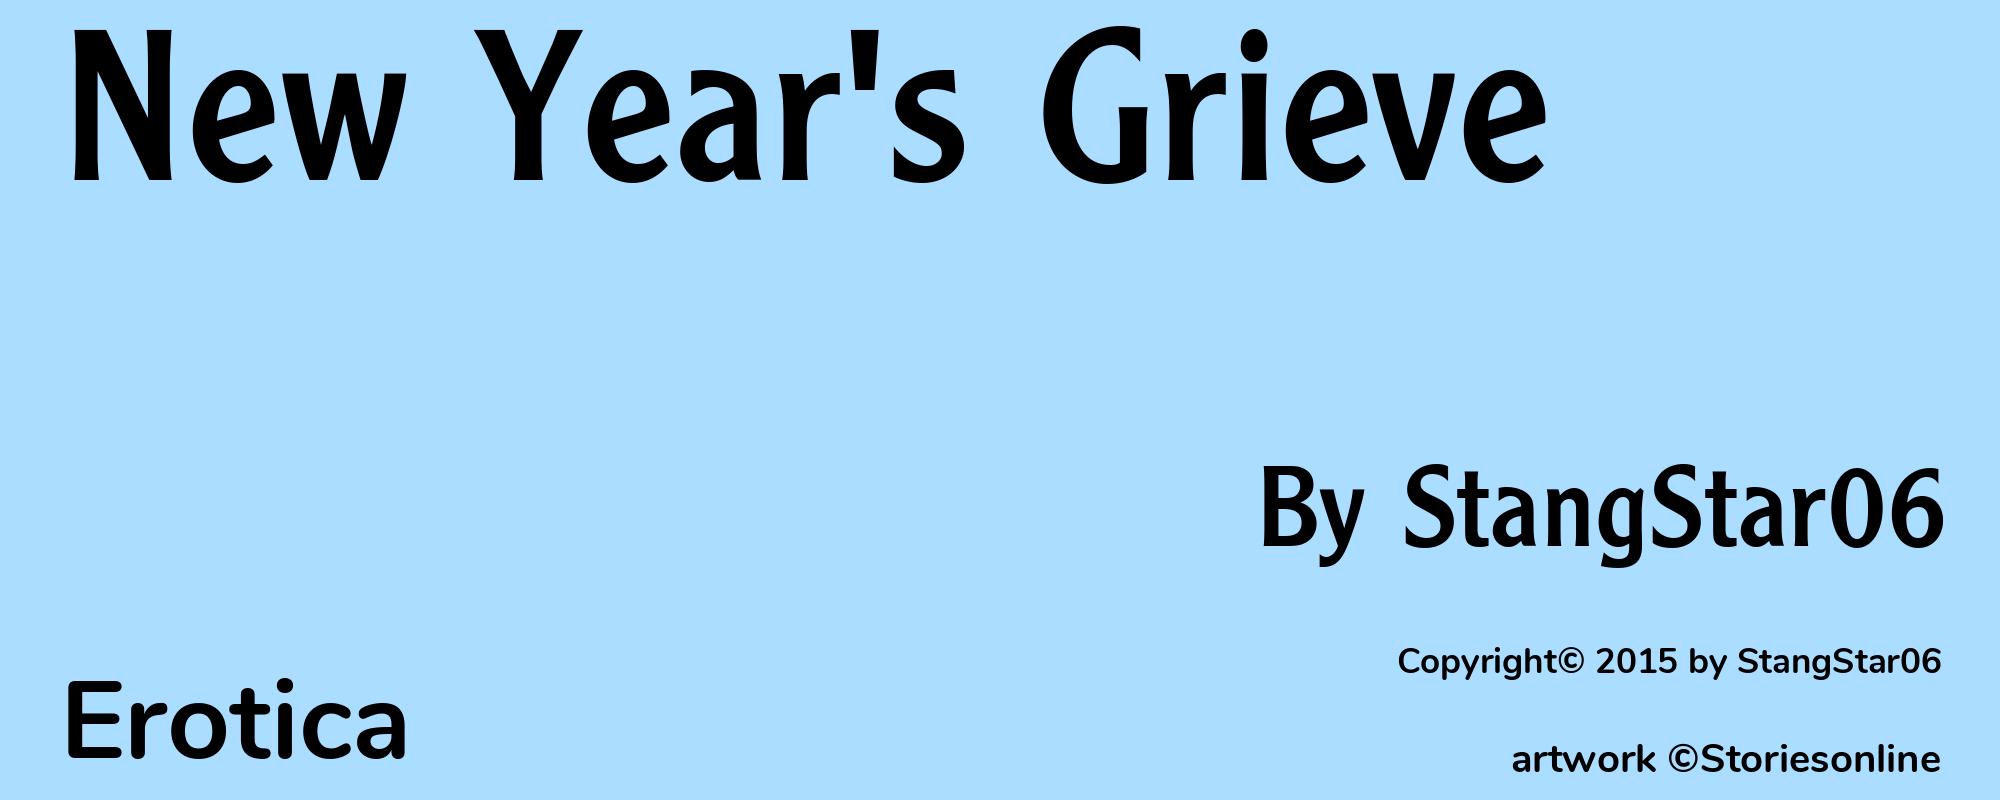 New Year's Grieve - Cover